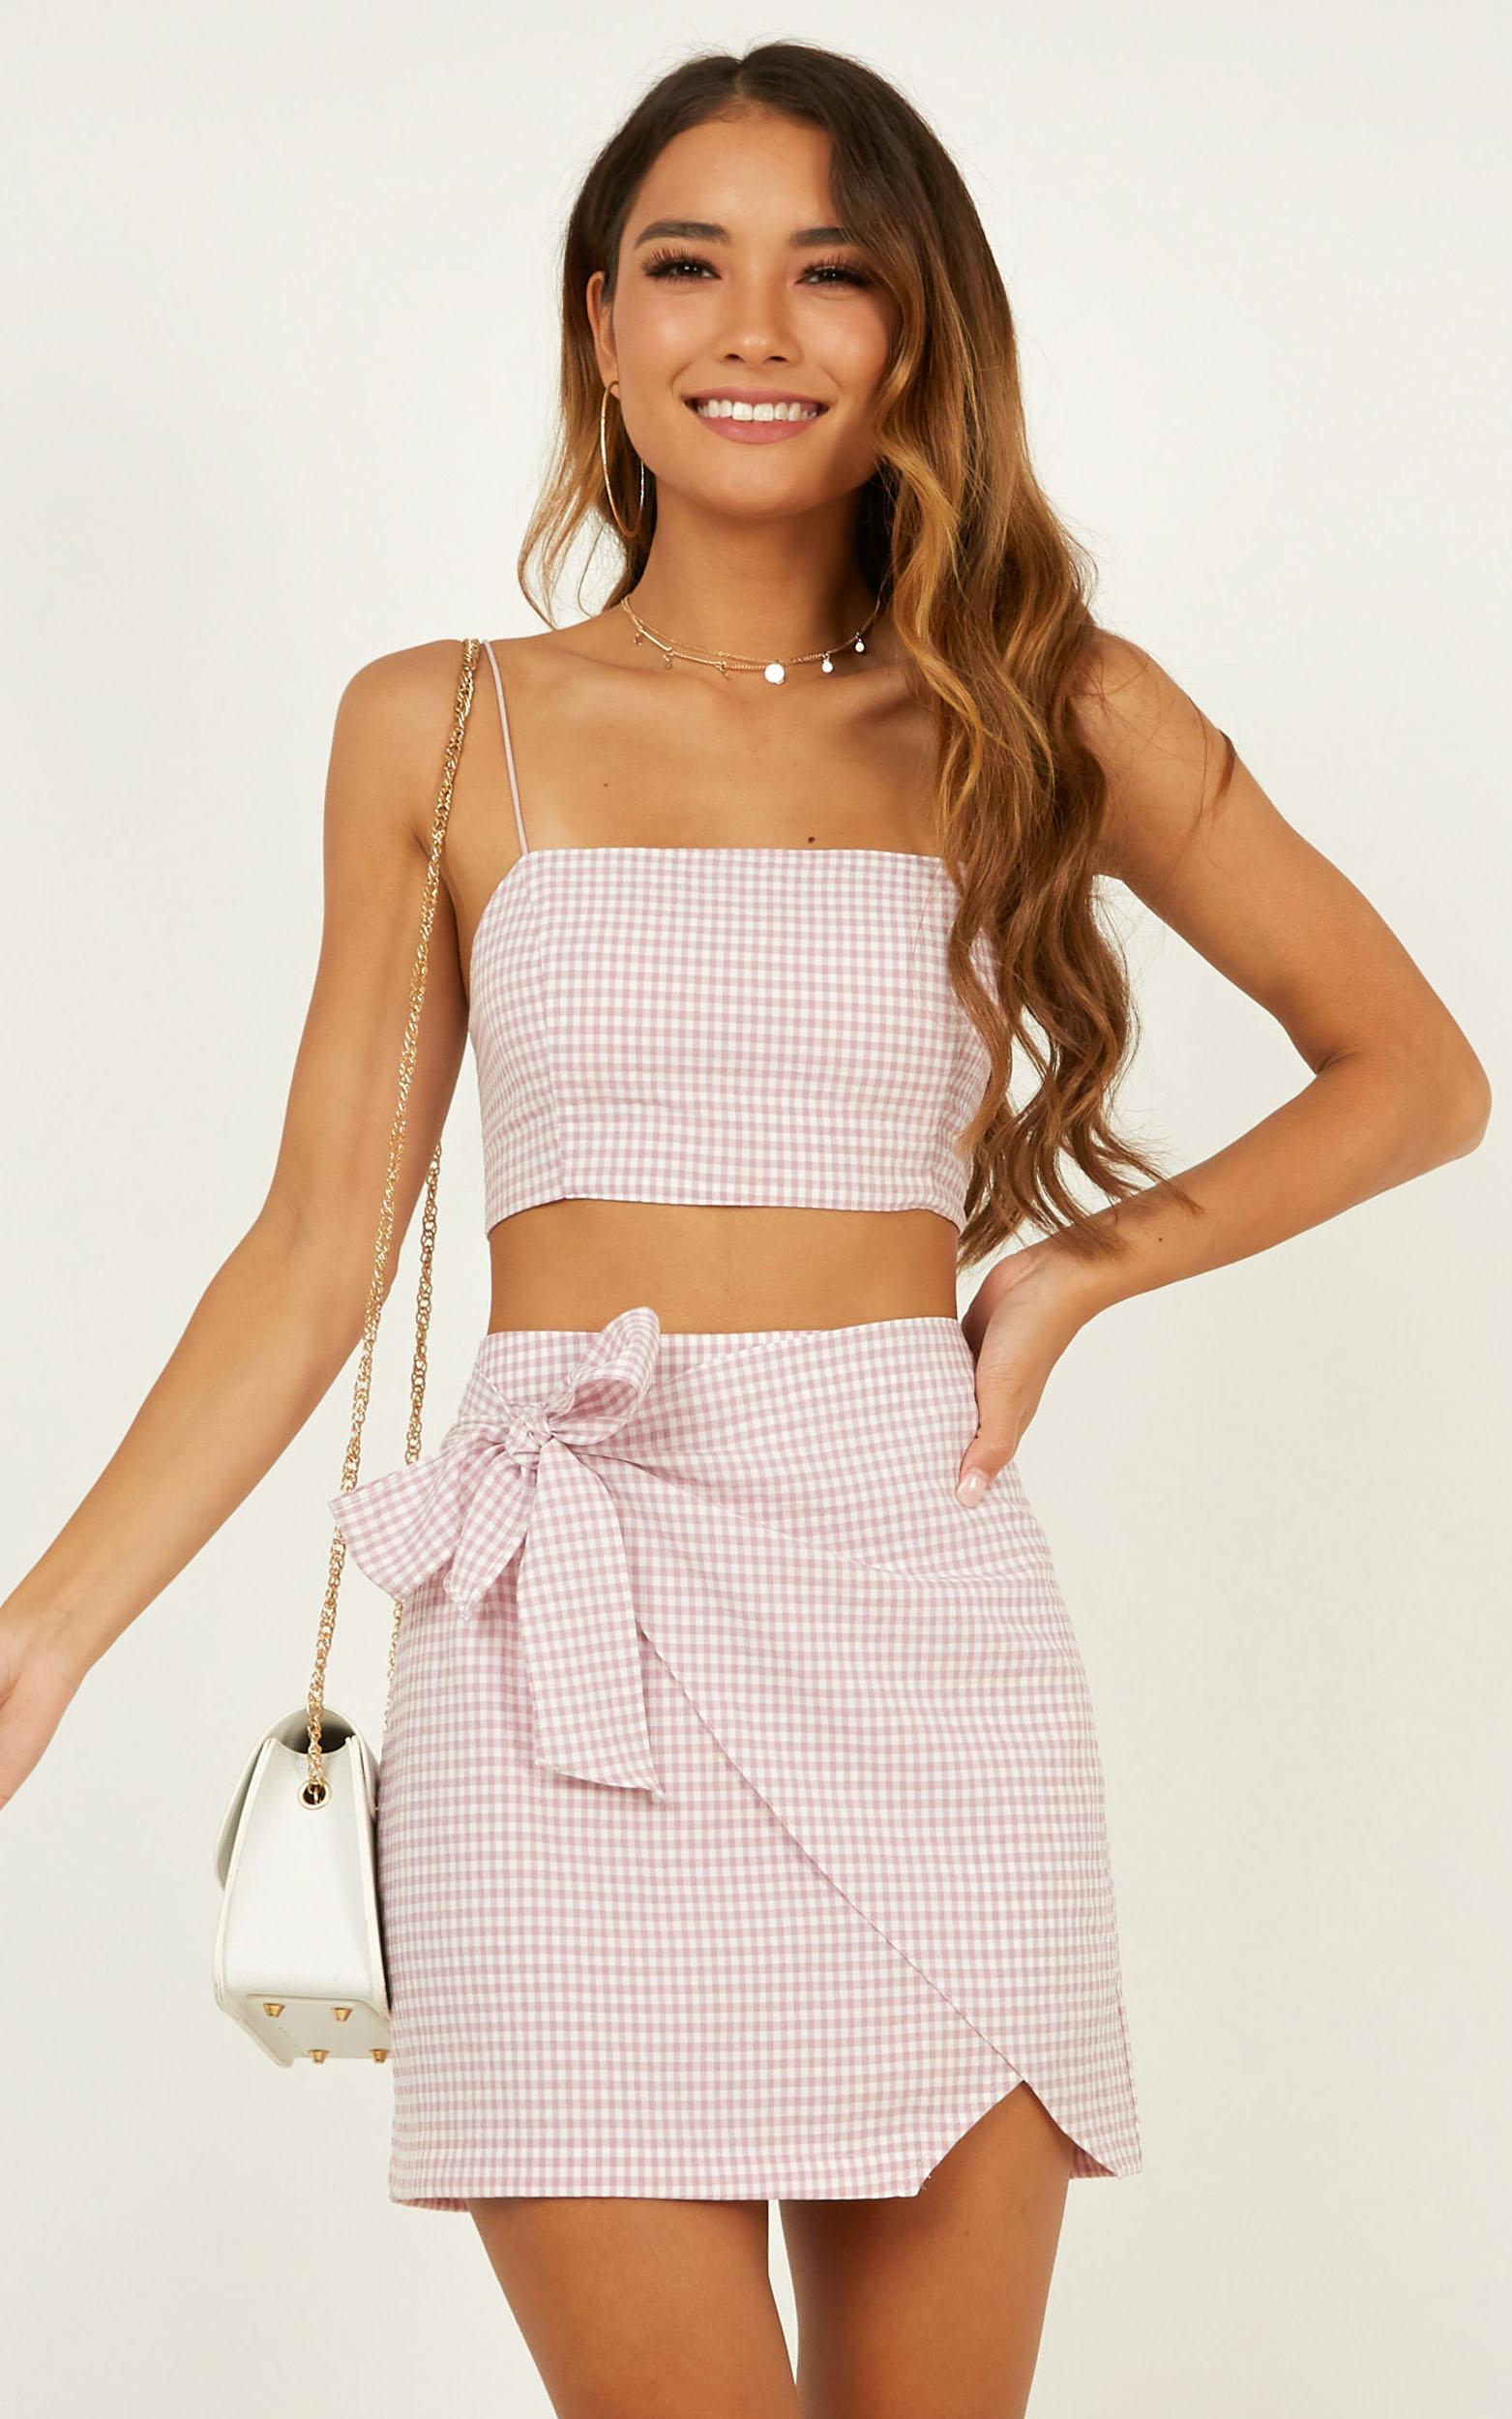 Keep On Turning Two Piece Set in pink gingham  - 20 (XXXXL), Pink, hi-res image number null